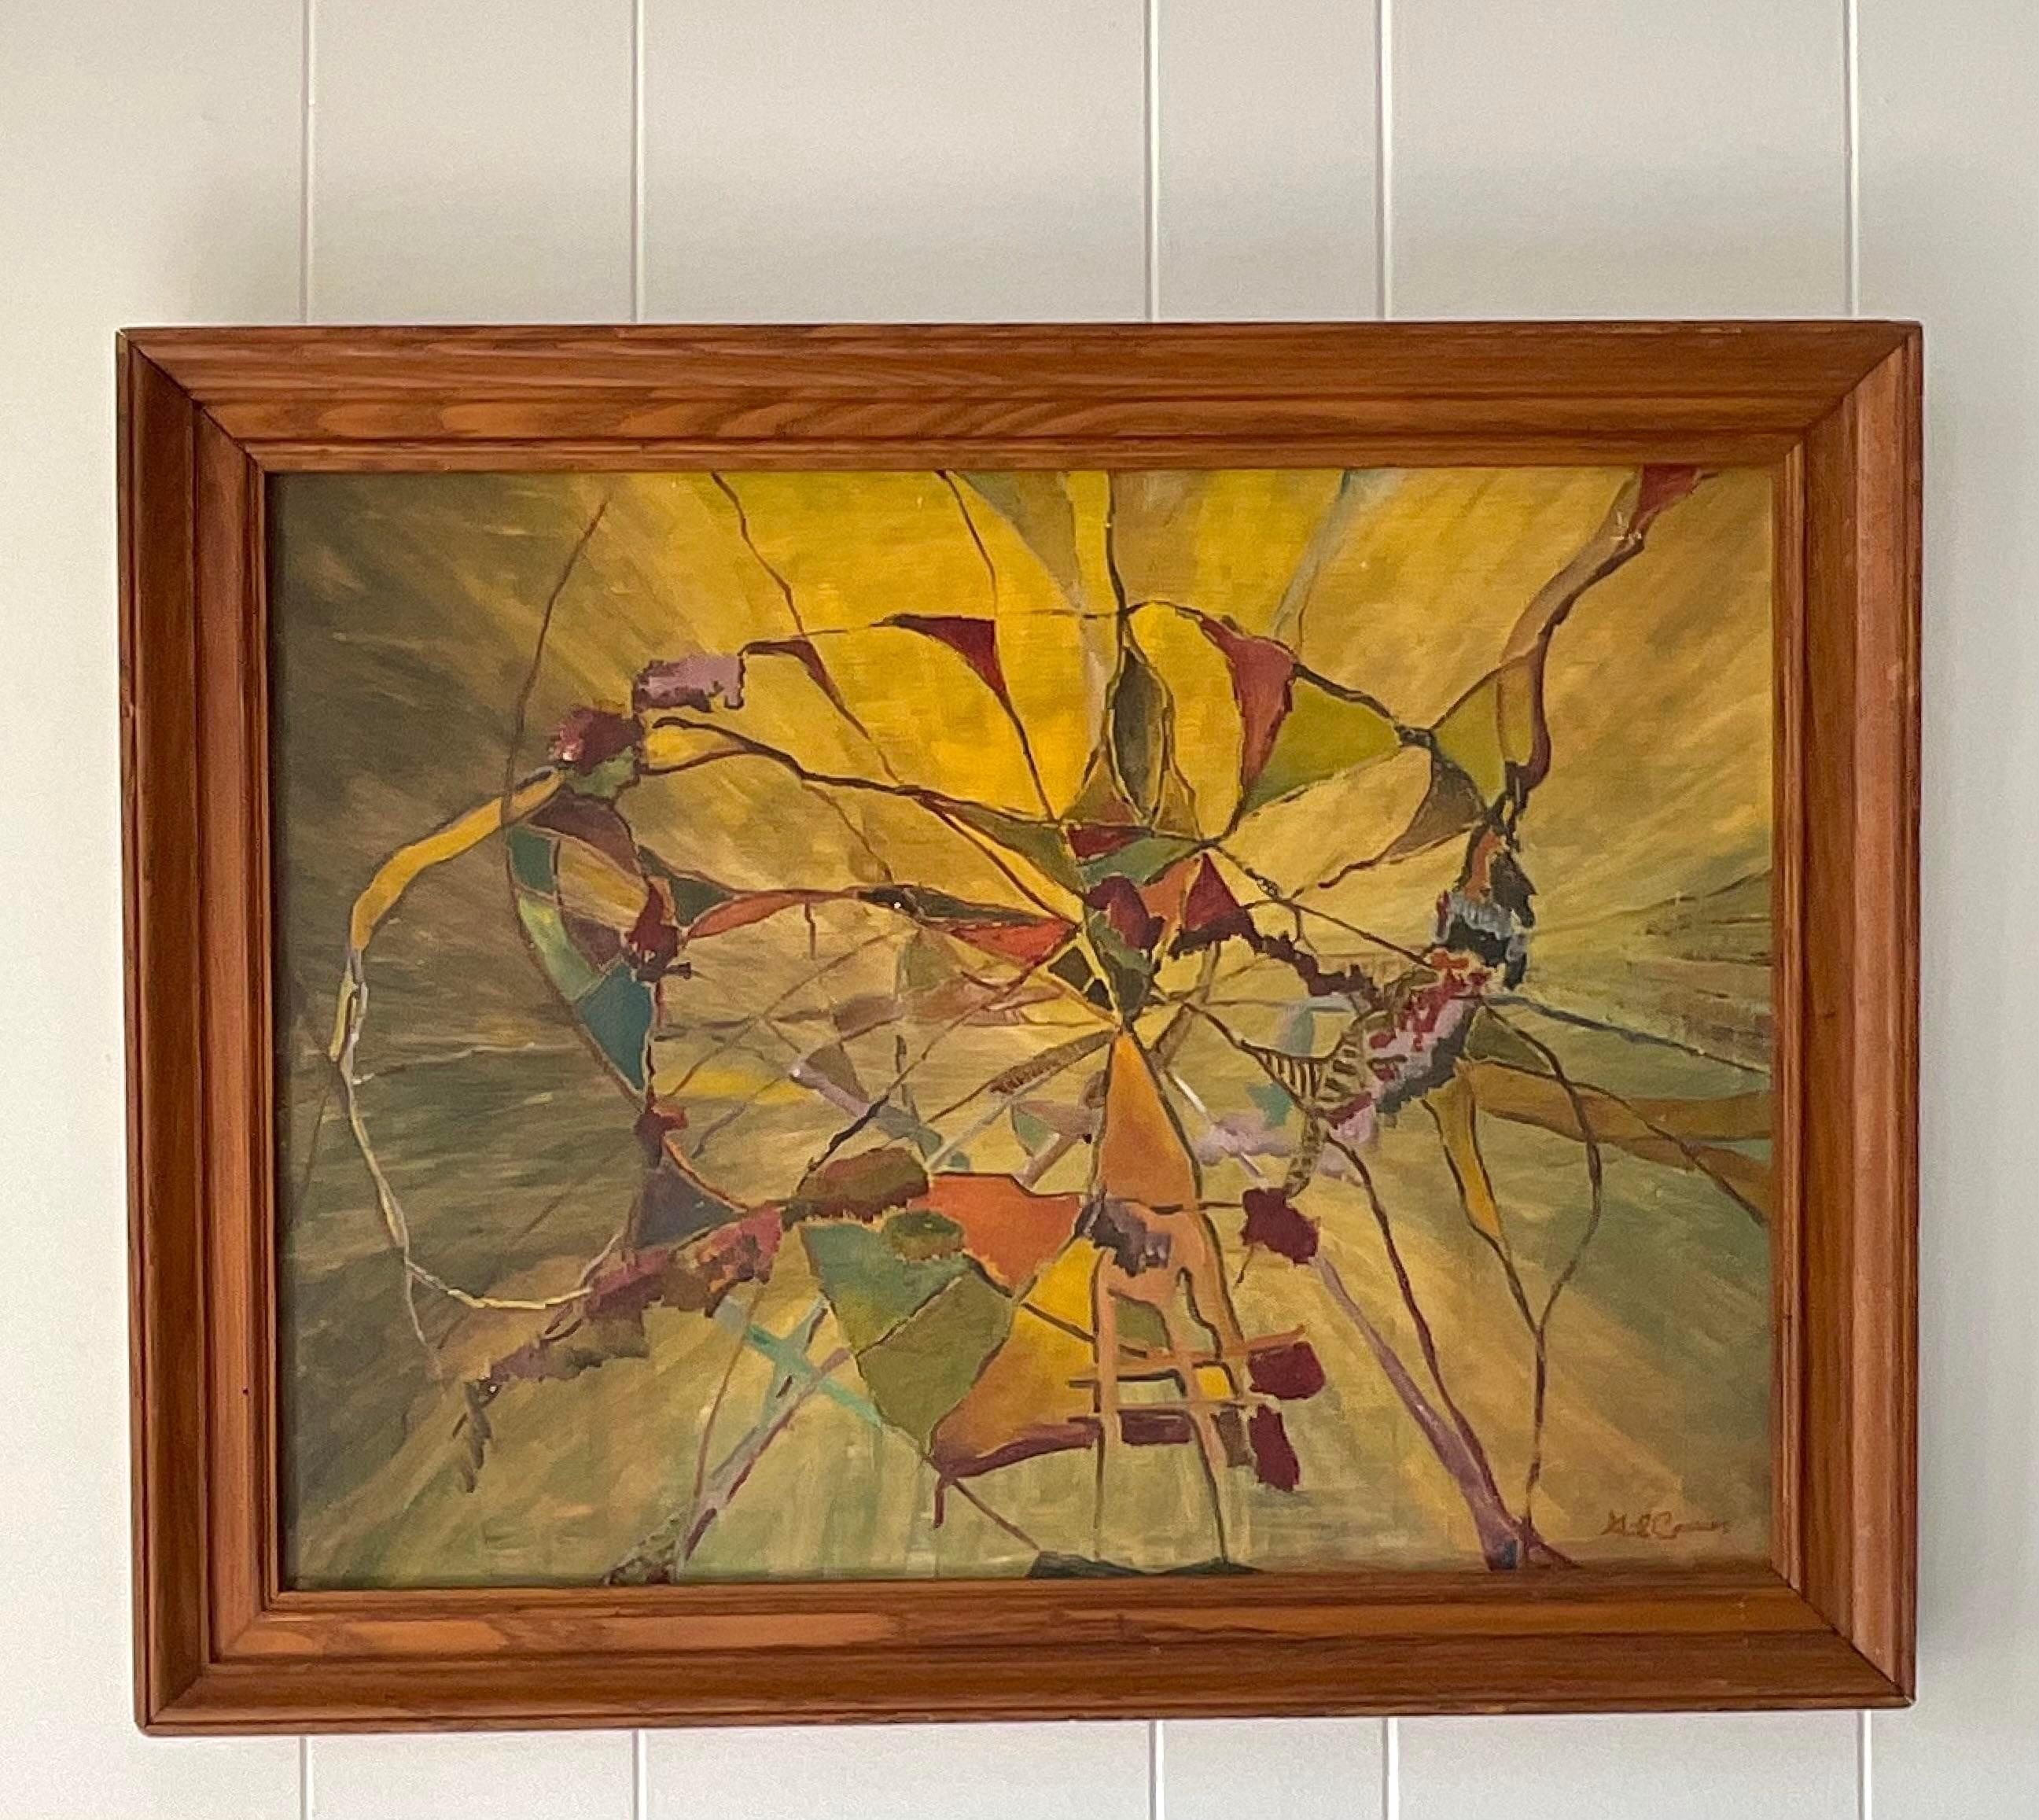 A fantastic vintage MCM original oil on canvas. A chic Abstract composition in deep rich colors. Signed by the artist. Acquired from a Palm Beach estate.